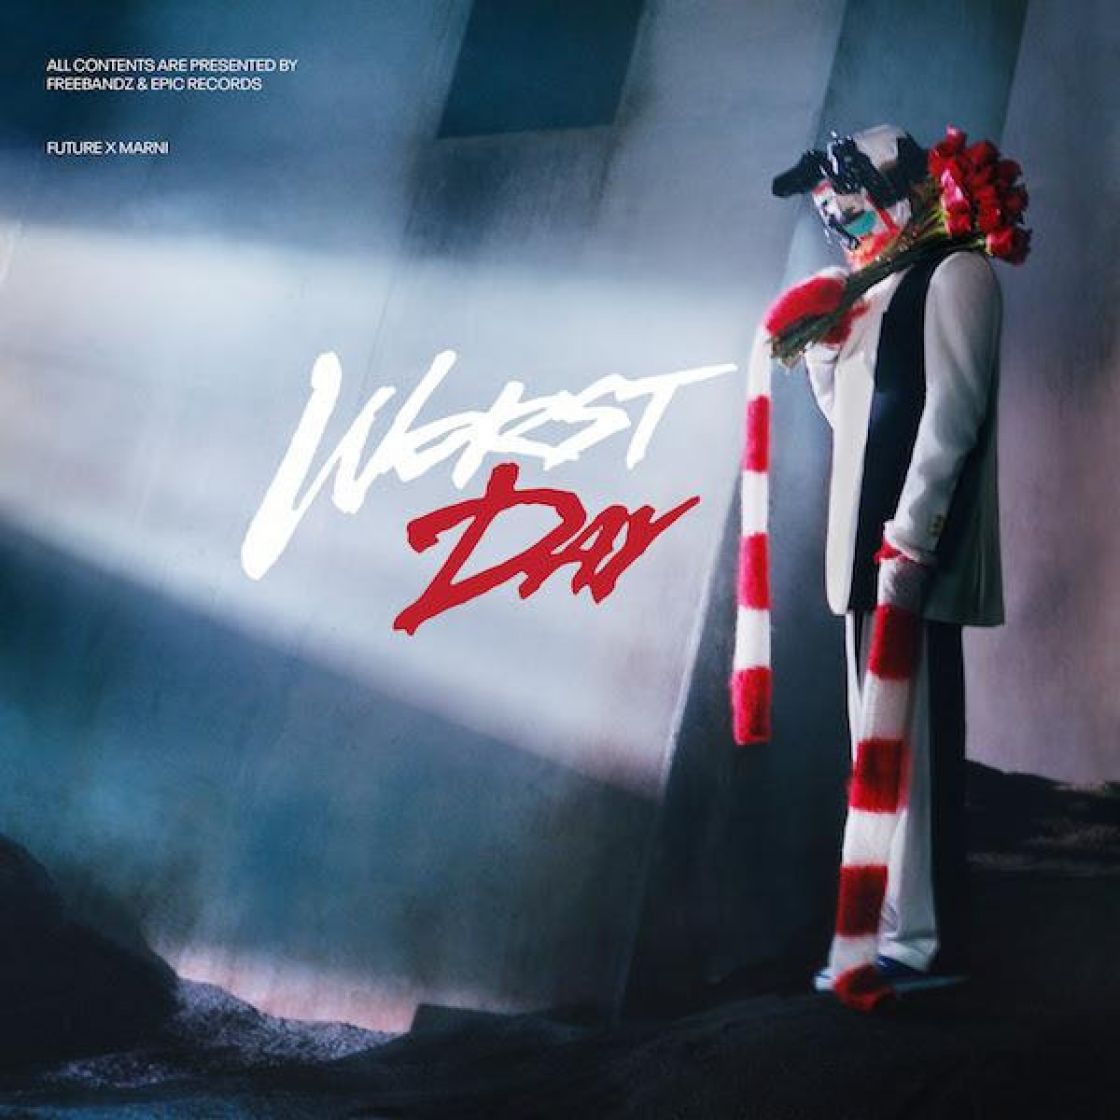 New Music by Future -Worst Day